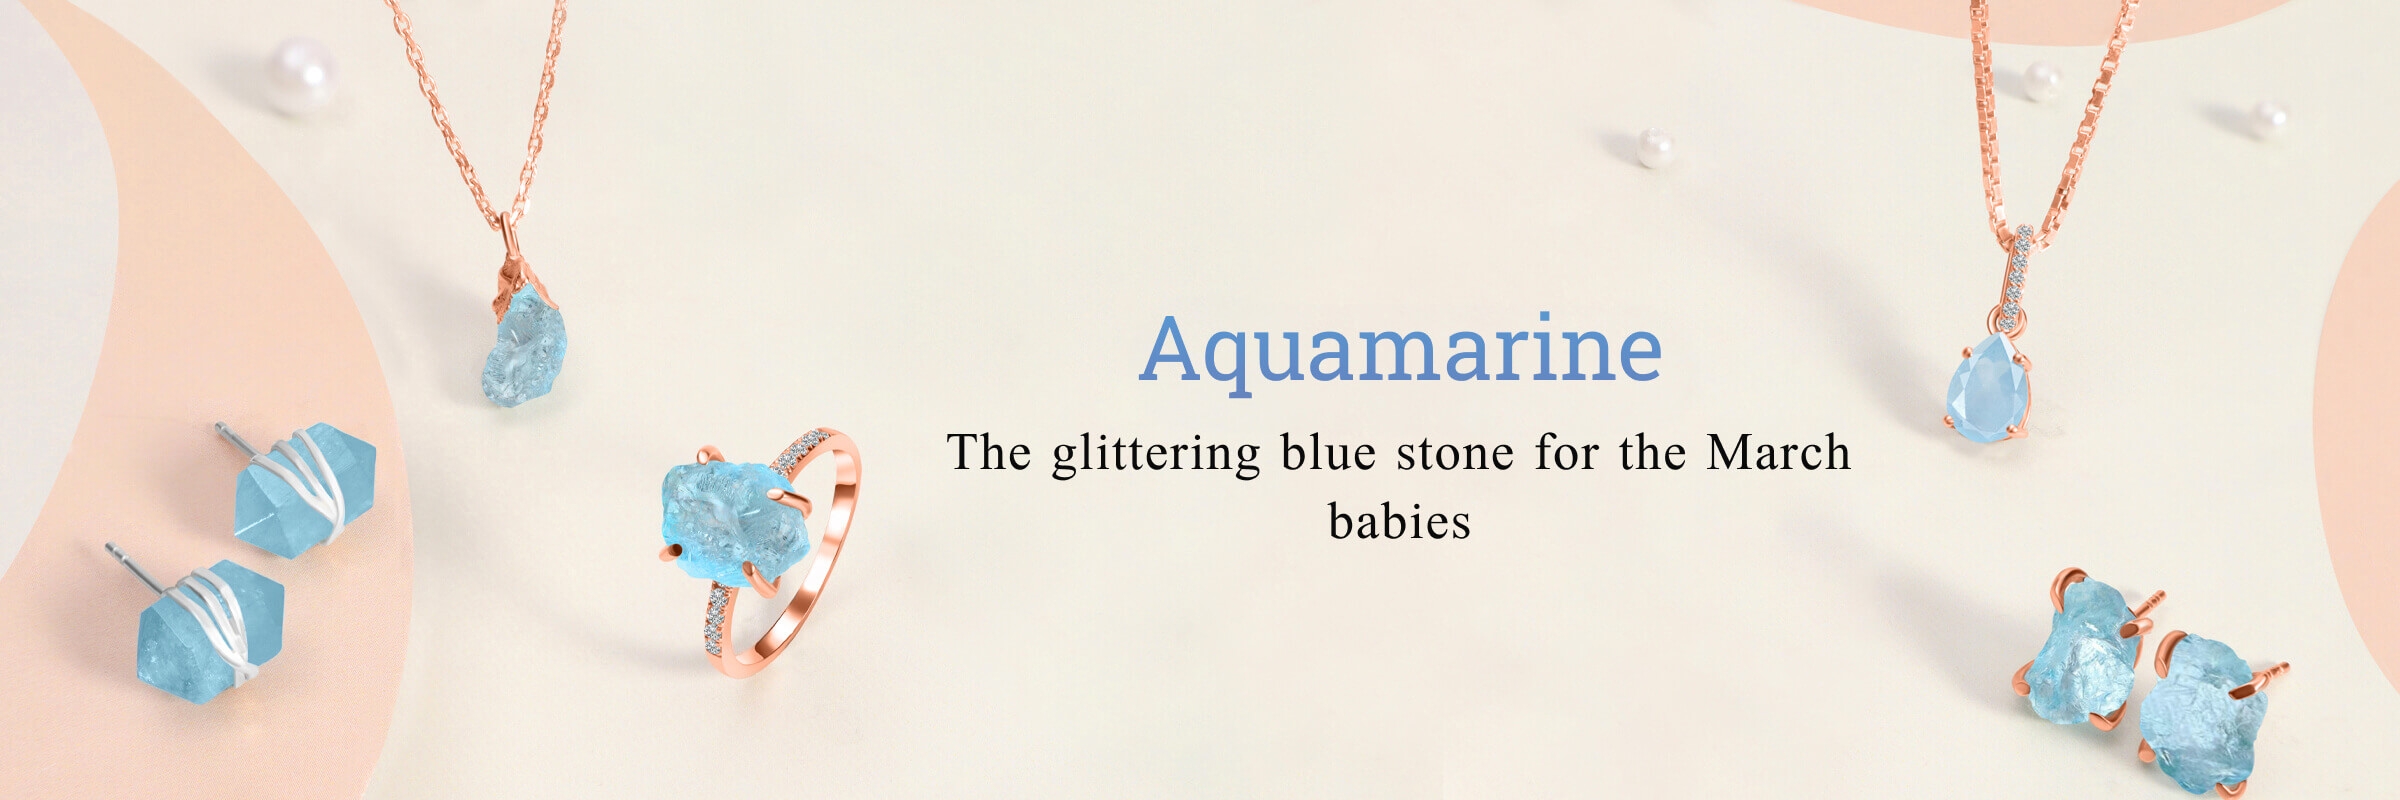 Aquamarine - The glittering blue stone for the March babies